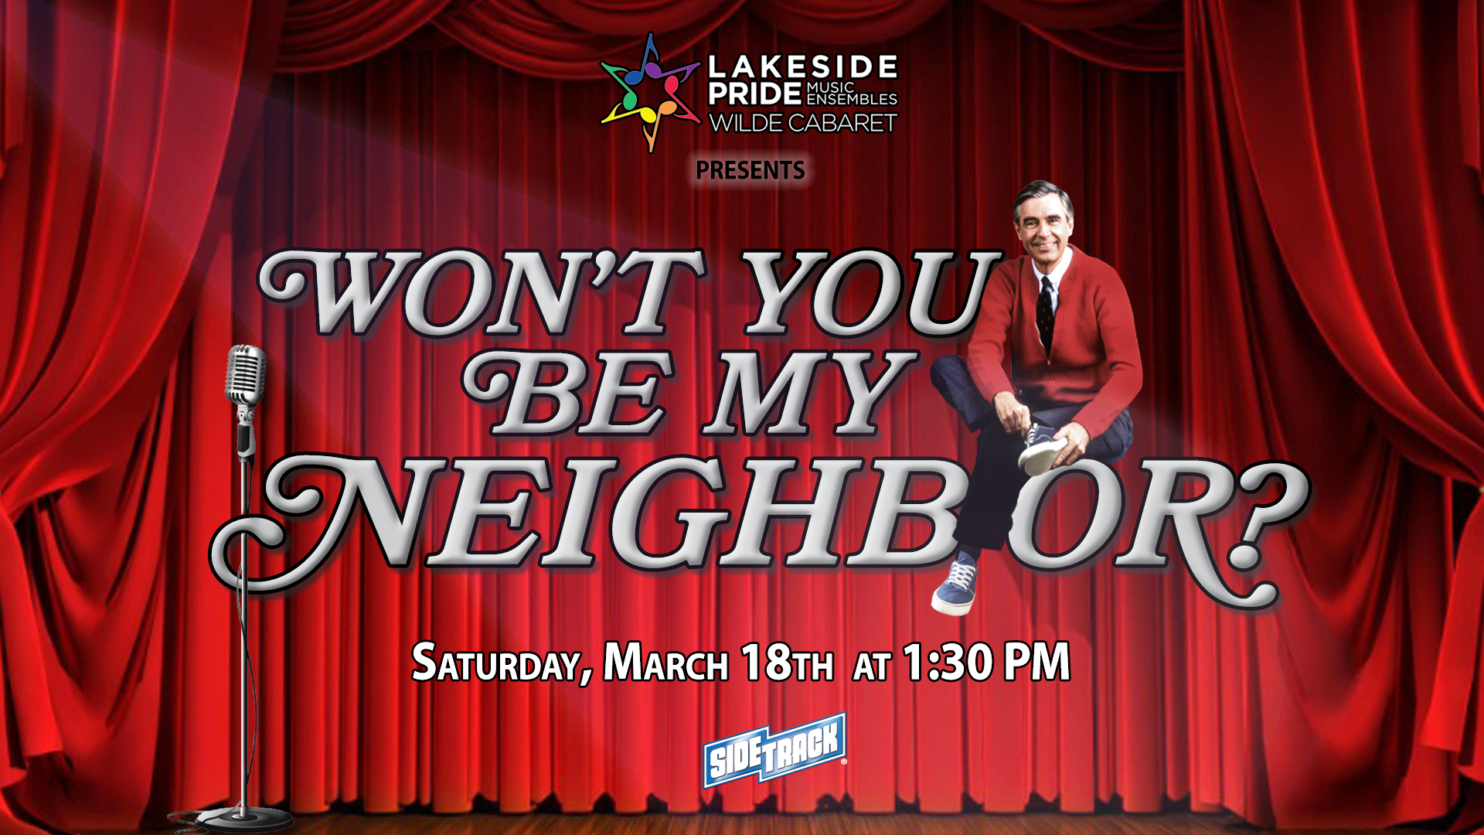 Wilde Cabaret's Be My Neighbor Cover, Mr. Roger's sitting on top of the 'o' in neighbor with a red curtain backdrop.